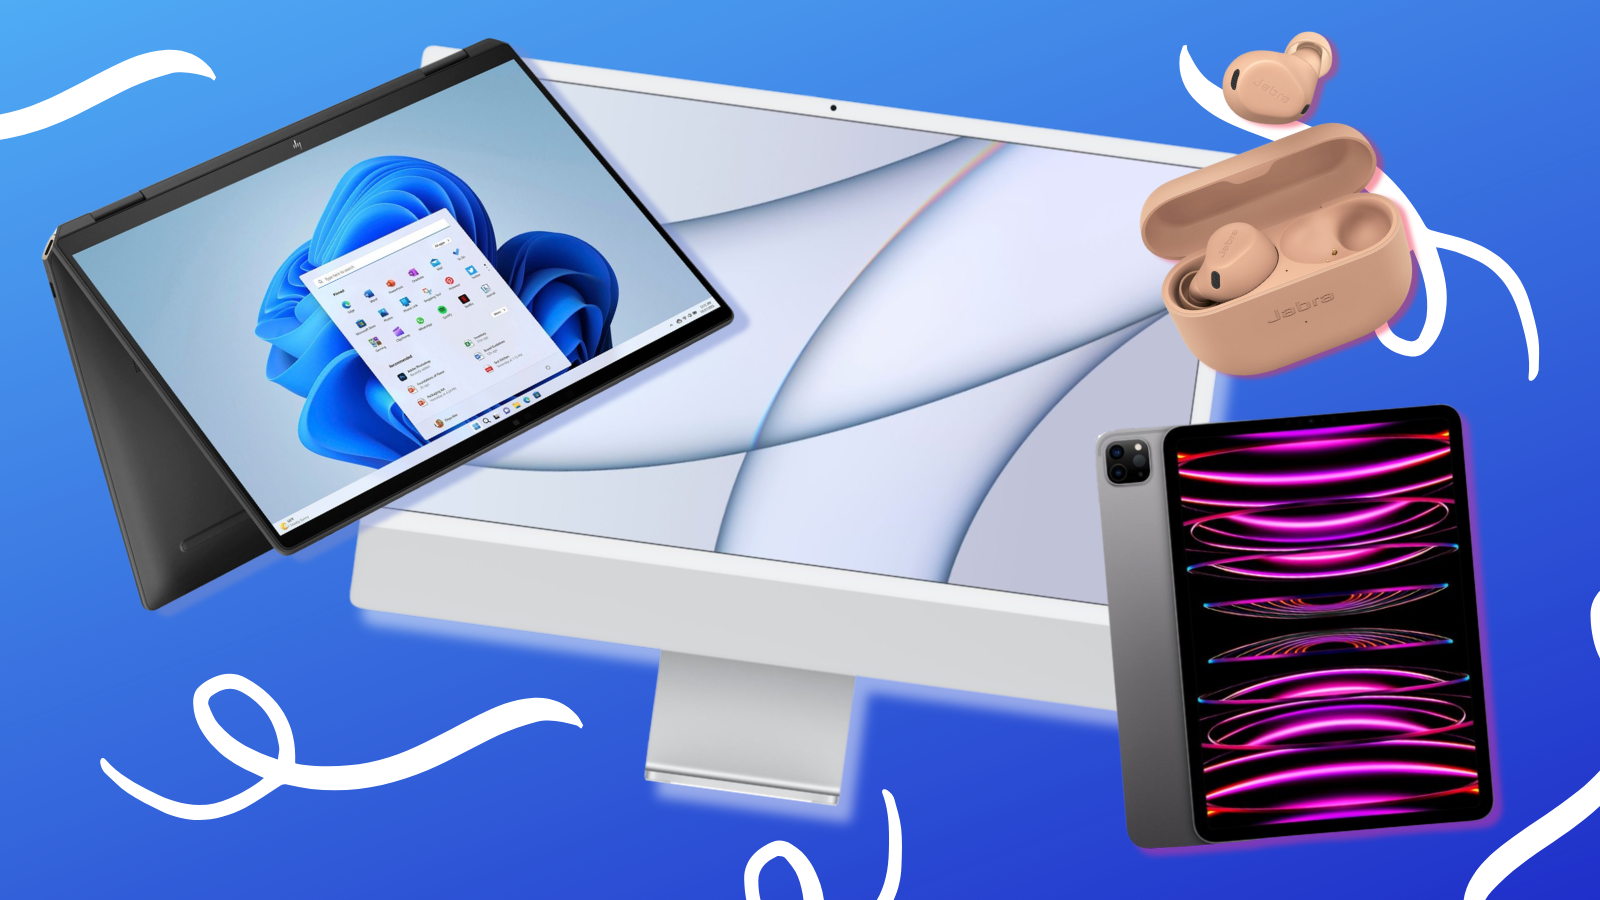 HP laptop, iMac, iPad, and Jabra headphones in collage with blue background